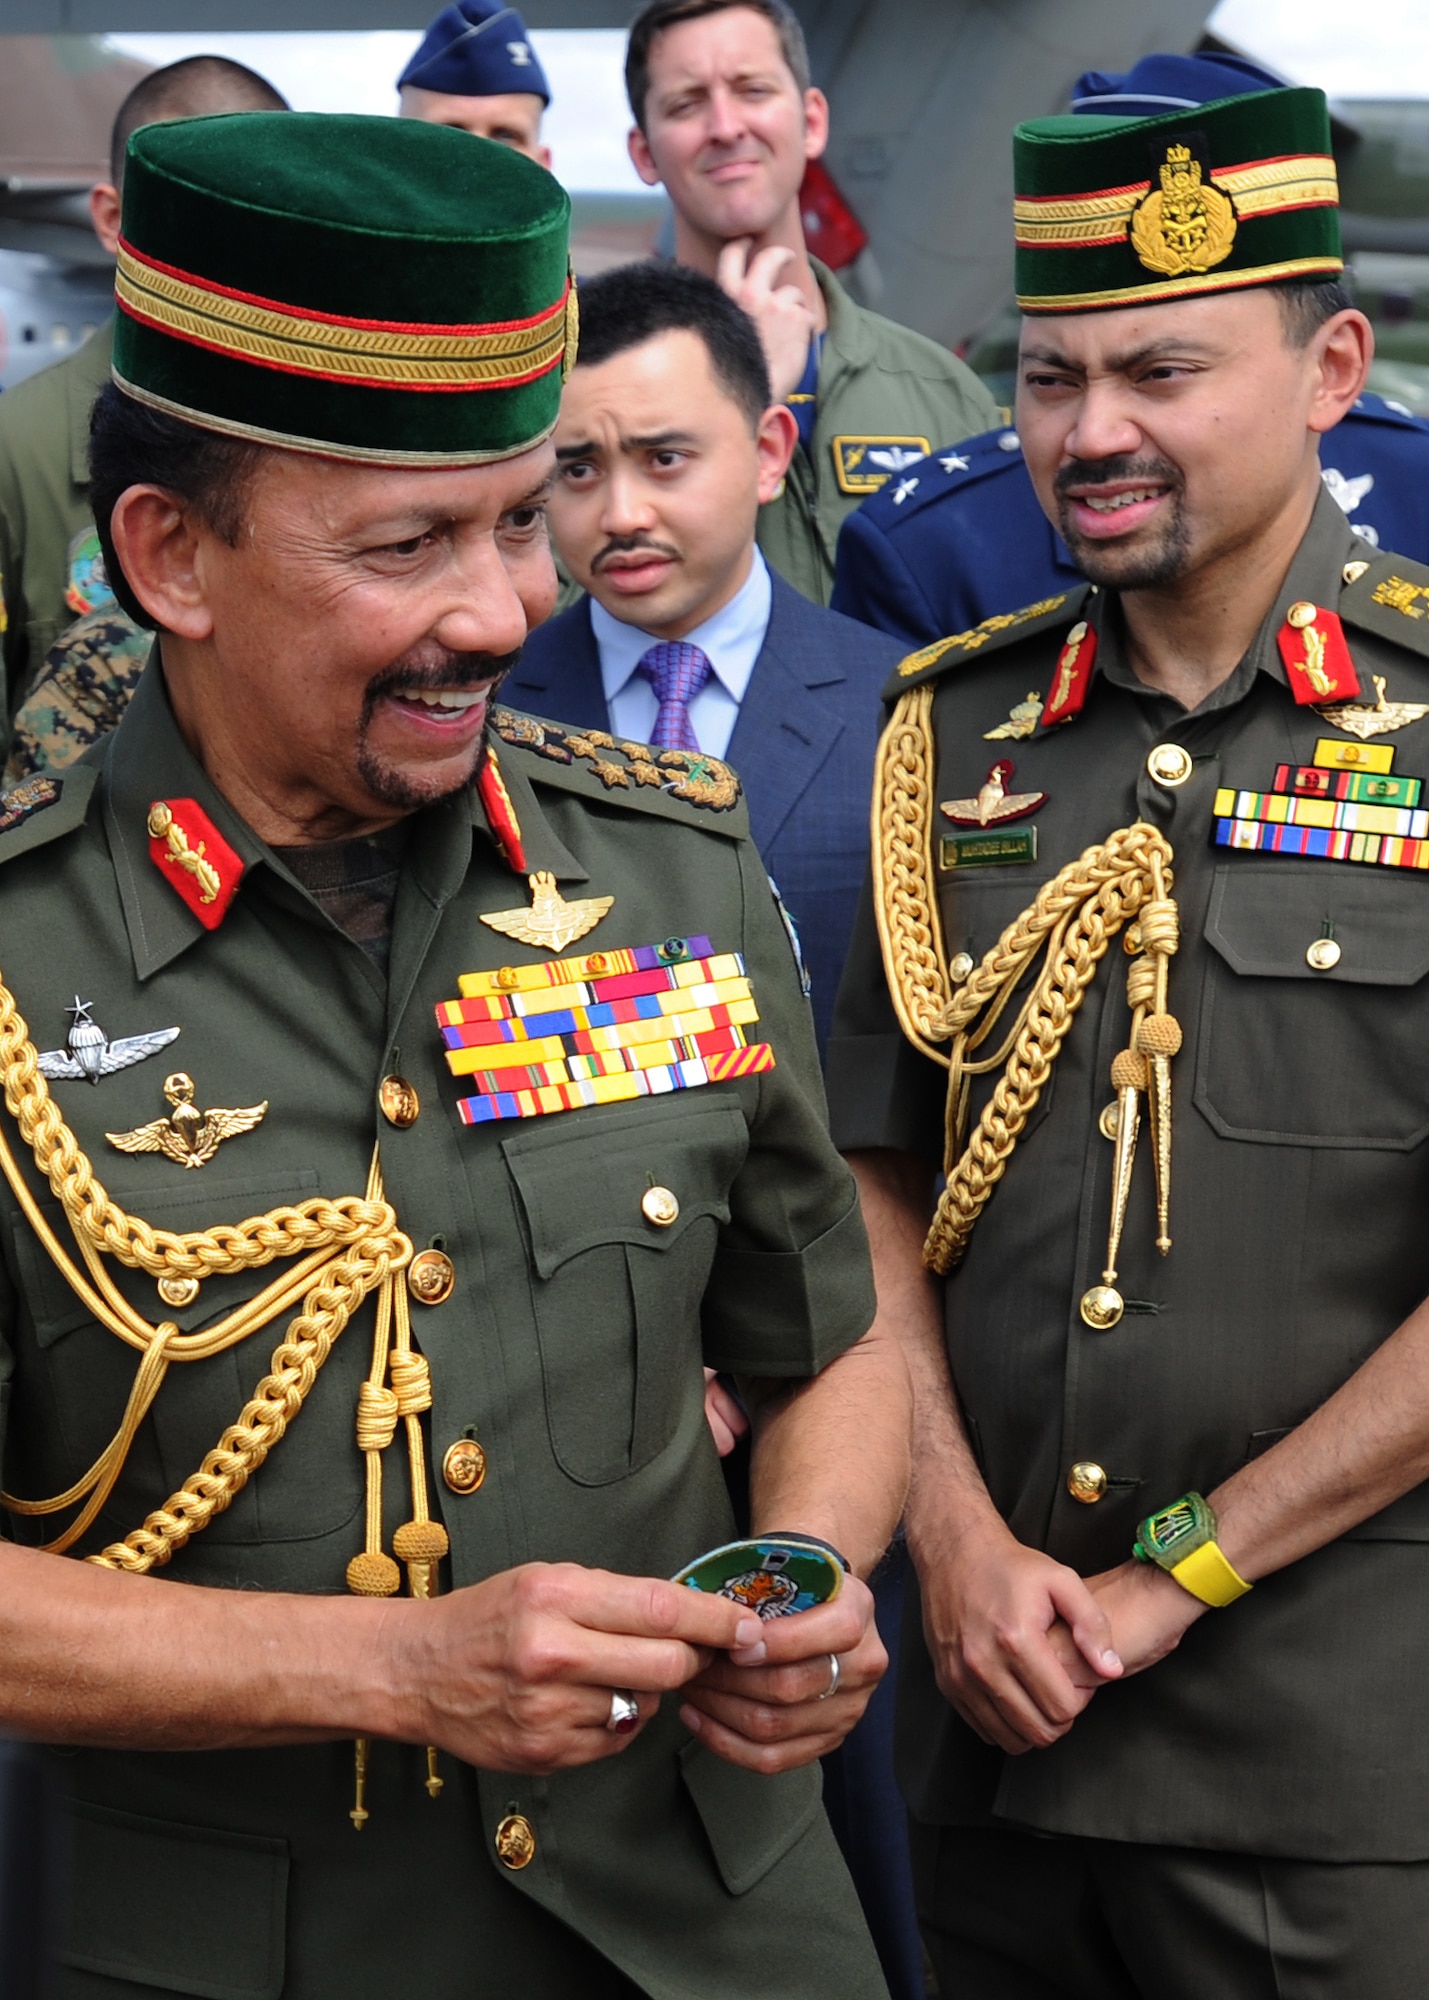 His Majesty Sultan Haji Hassanal Bolkiahsutan of Brunei, left, accepts a flight patch from a U.S. servicemember during the 4th biennial Brunei Darussalam International Defense Exhibition, on the flightline at Rimba Air Base, Dec. 3, 2013. BRIDEX 13 is an opportunity for networking and sharing technology with regional partners and allies, building strong multilateral relationships, increased cooperation and enhanced preparedness for disasters and other contingency operations. (U.S. Air Force photo/Master Sgt. Jerome S. Tayborn)